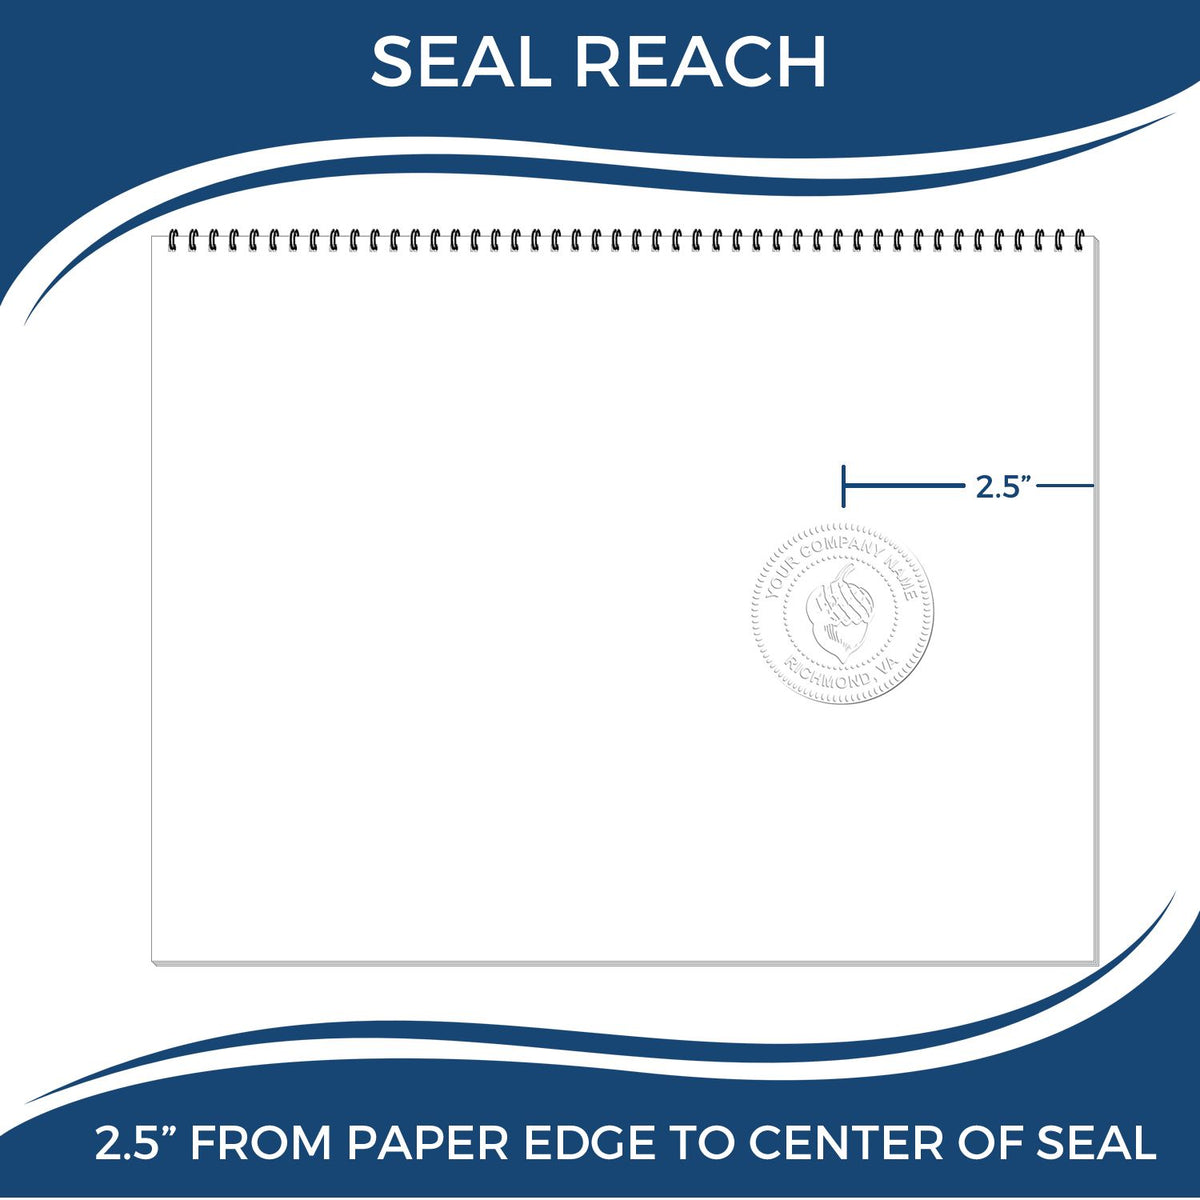 An infographic showing the seal reach which is represented by a ruler and a miniature seal image of the State of Washington Long Reach Architectural Embossing Seal